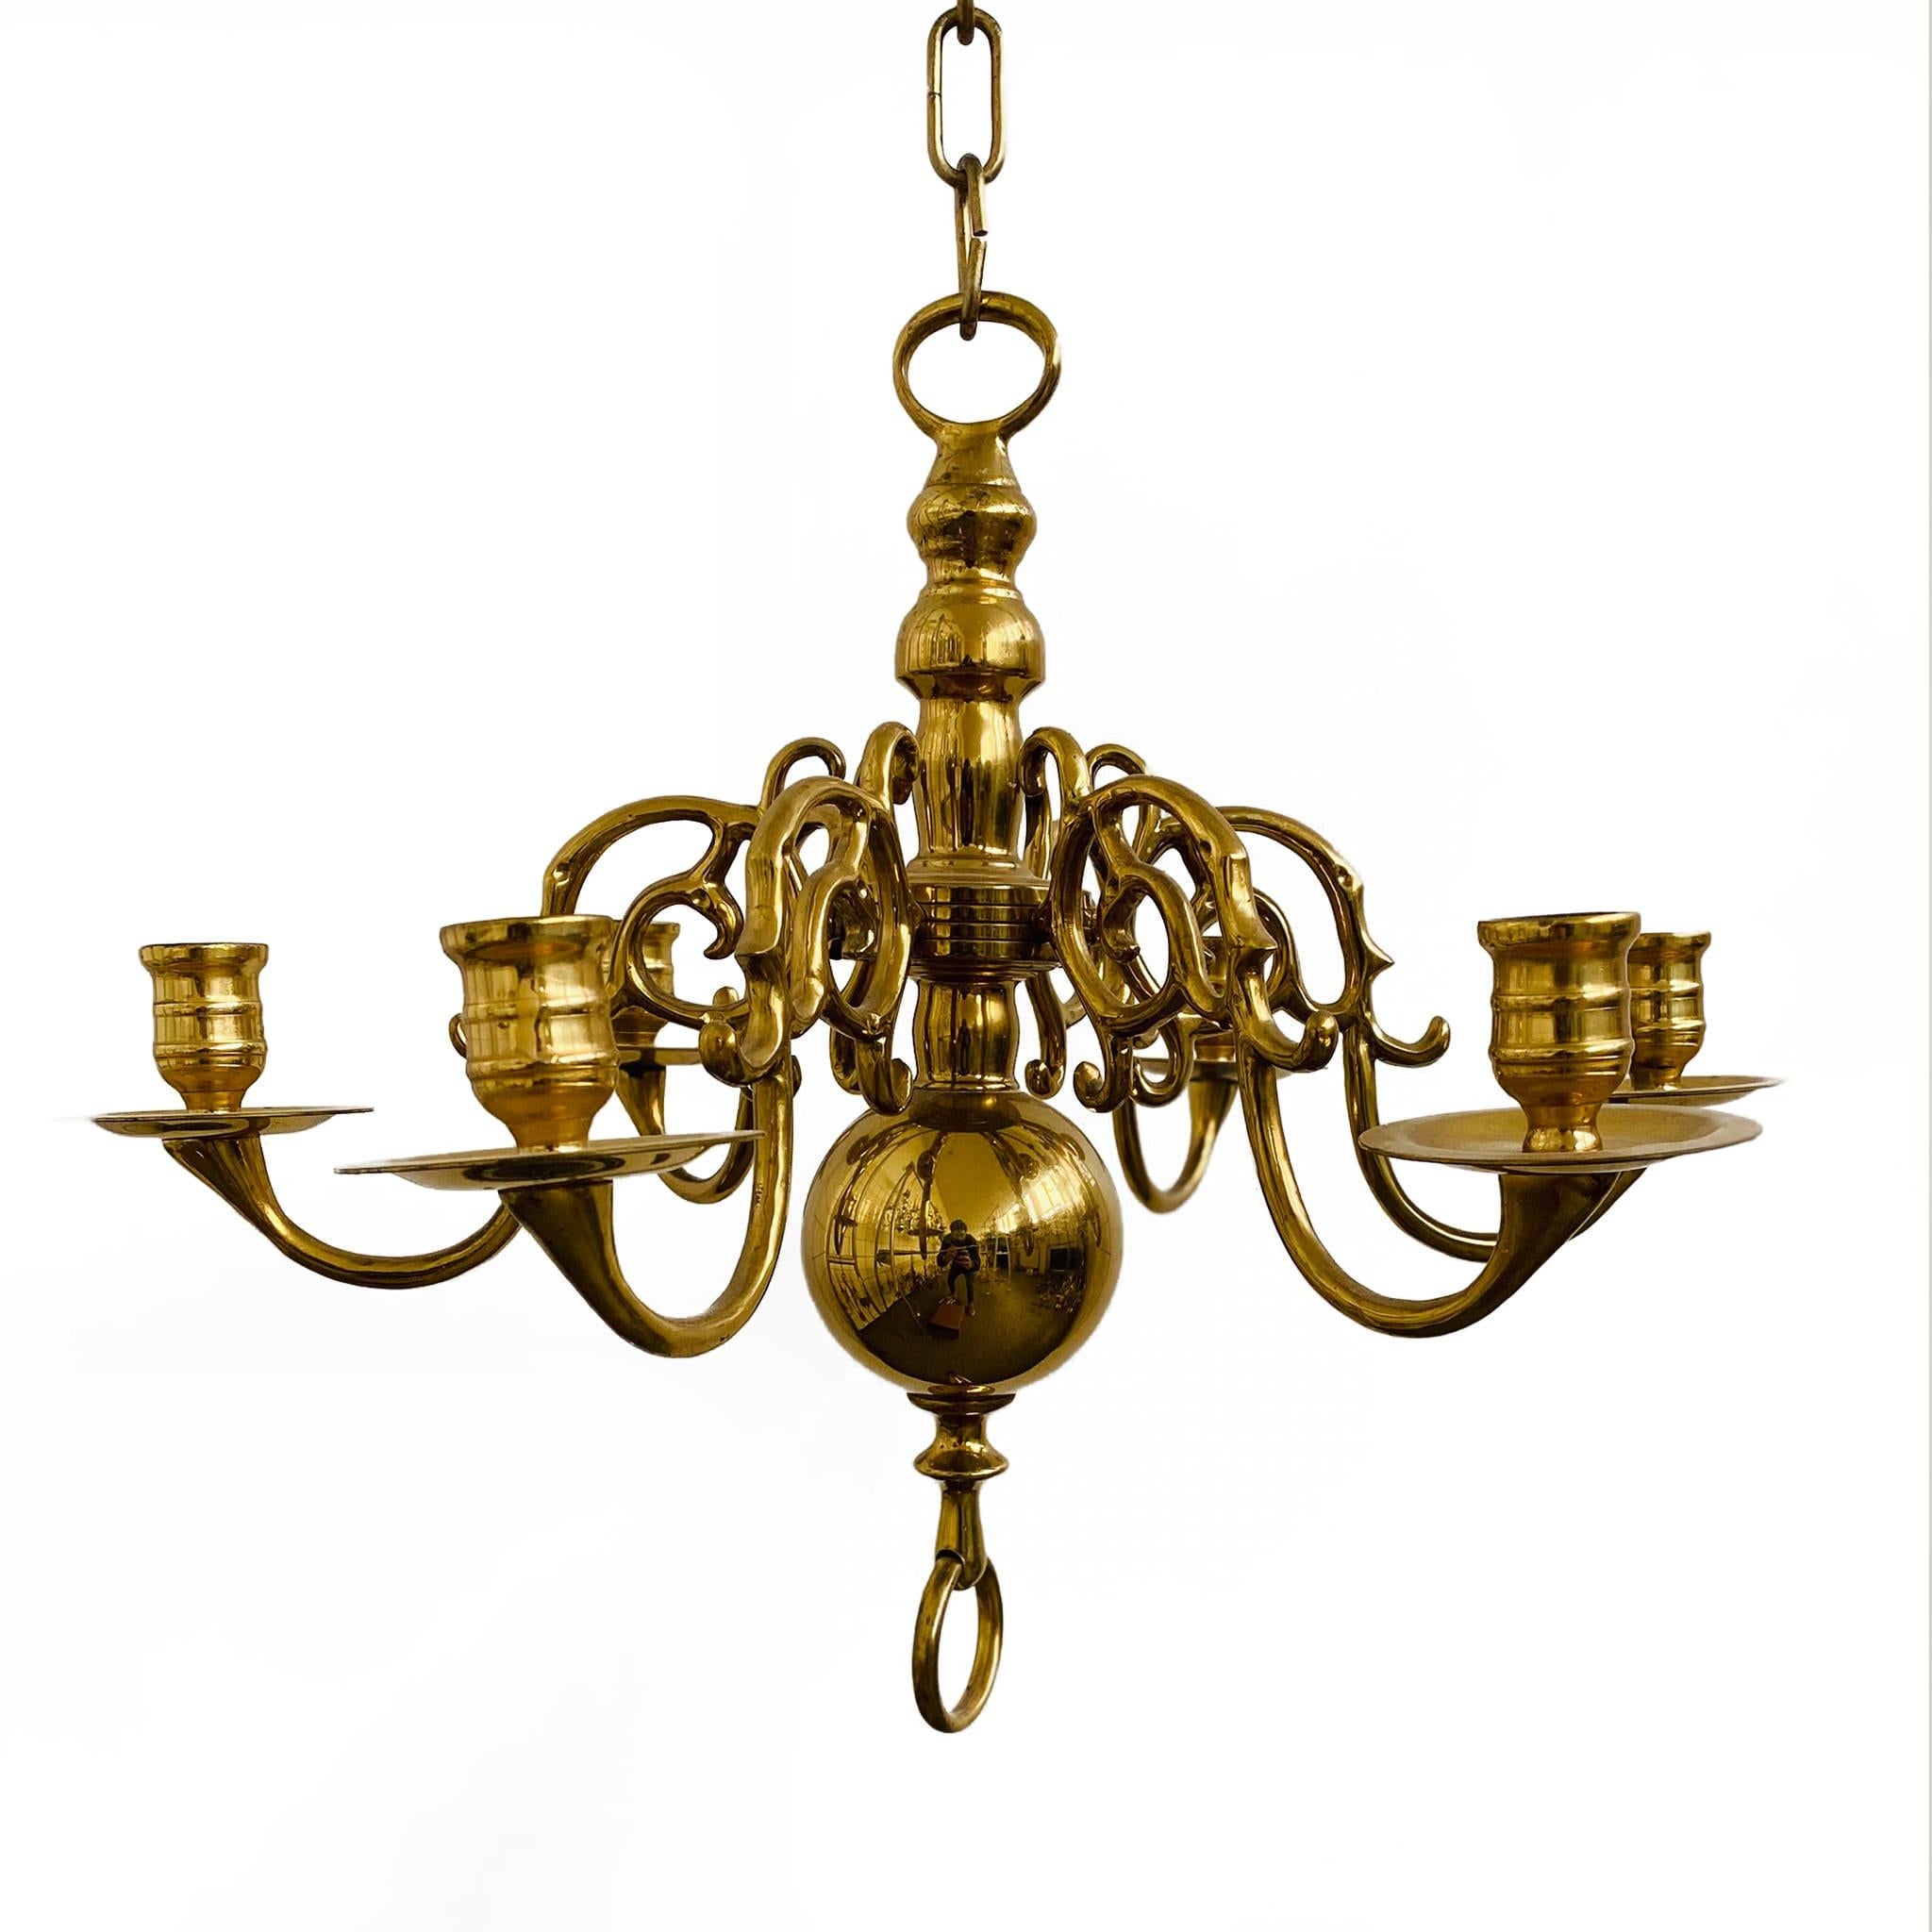 Vintage 1 Tier 17th Century Candle Dutch Brass Chandelier 6 Lights H45xW50 For Sale 1